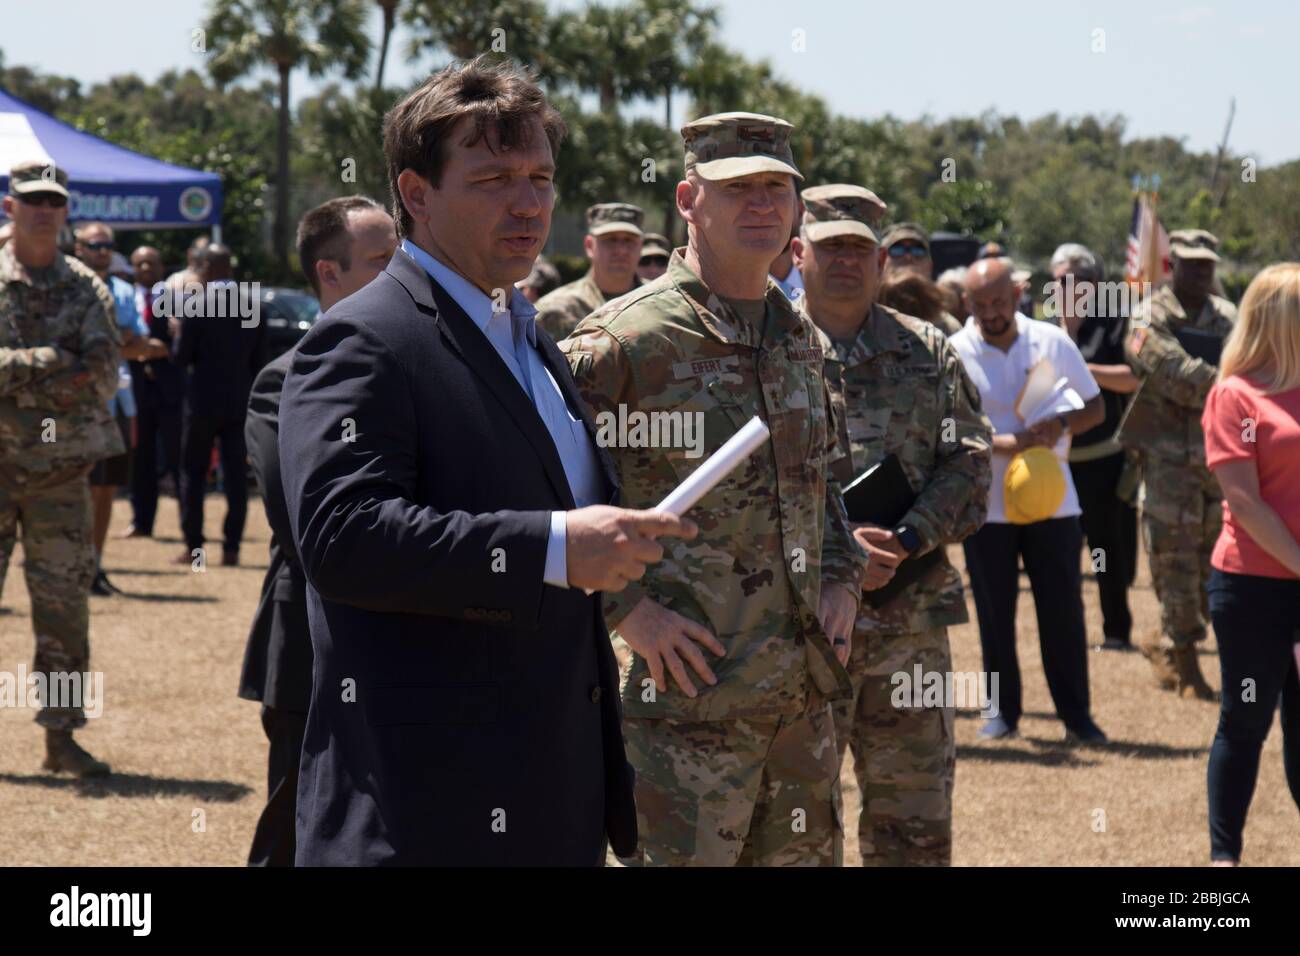 Florida Gov. Ron DeSantis, left, addresses Florida National Guardsmen with U.S. Air Force Maj. Gen. James O. Eifert, the Adjutant General of the Florida National Guard, right, on the COVID-19 pandemic March 30, 2020 in West Palm Beach, Florida. DeSantis has been criticized for his slow response to the pandemic and failure to impose strict guidelines on social distancing to prevent the spread of the virus. Stock Photo